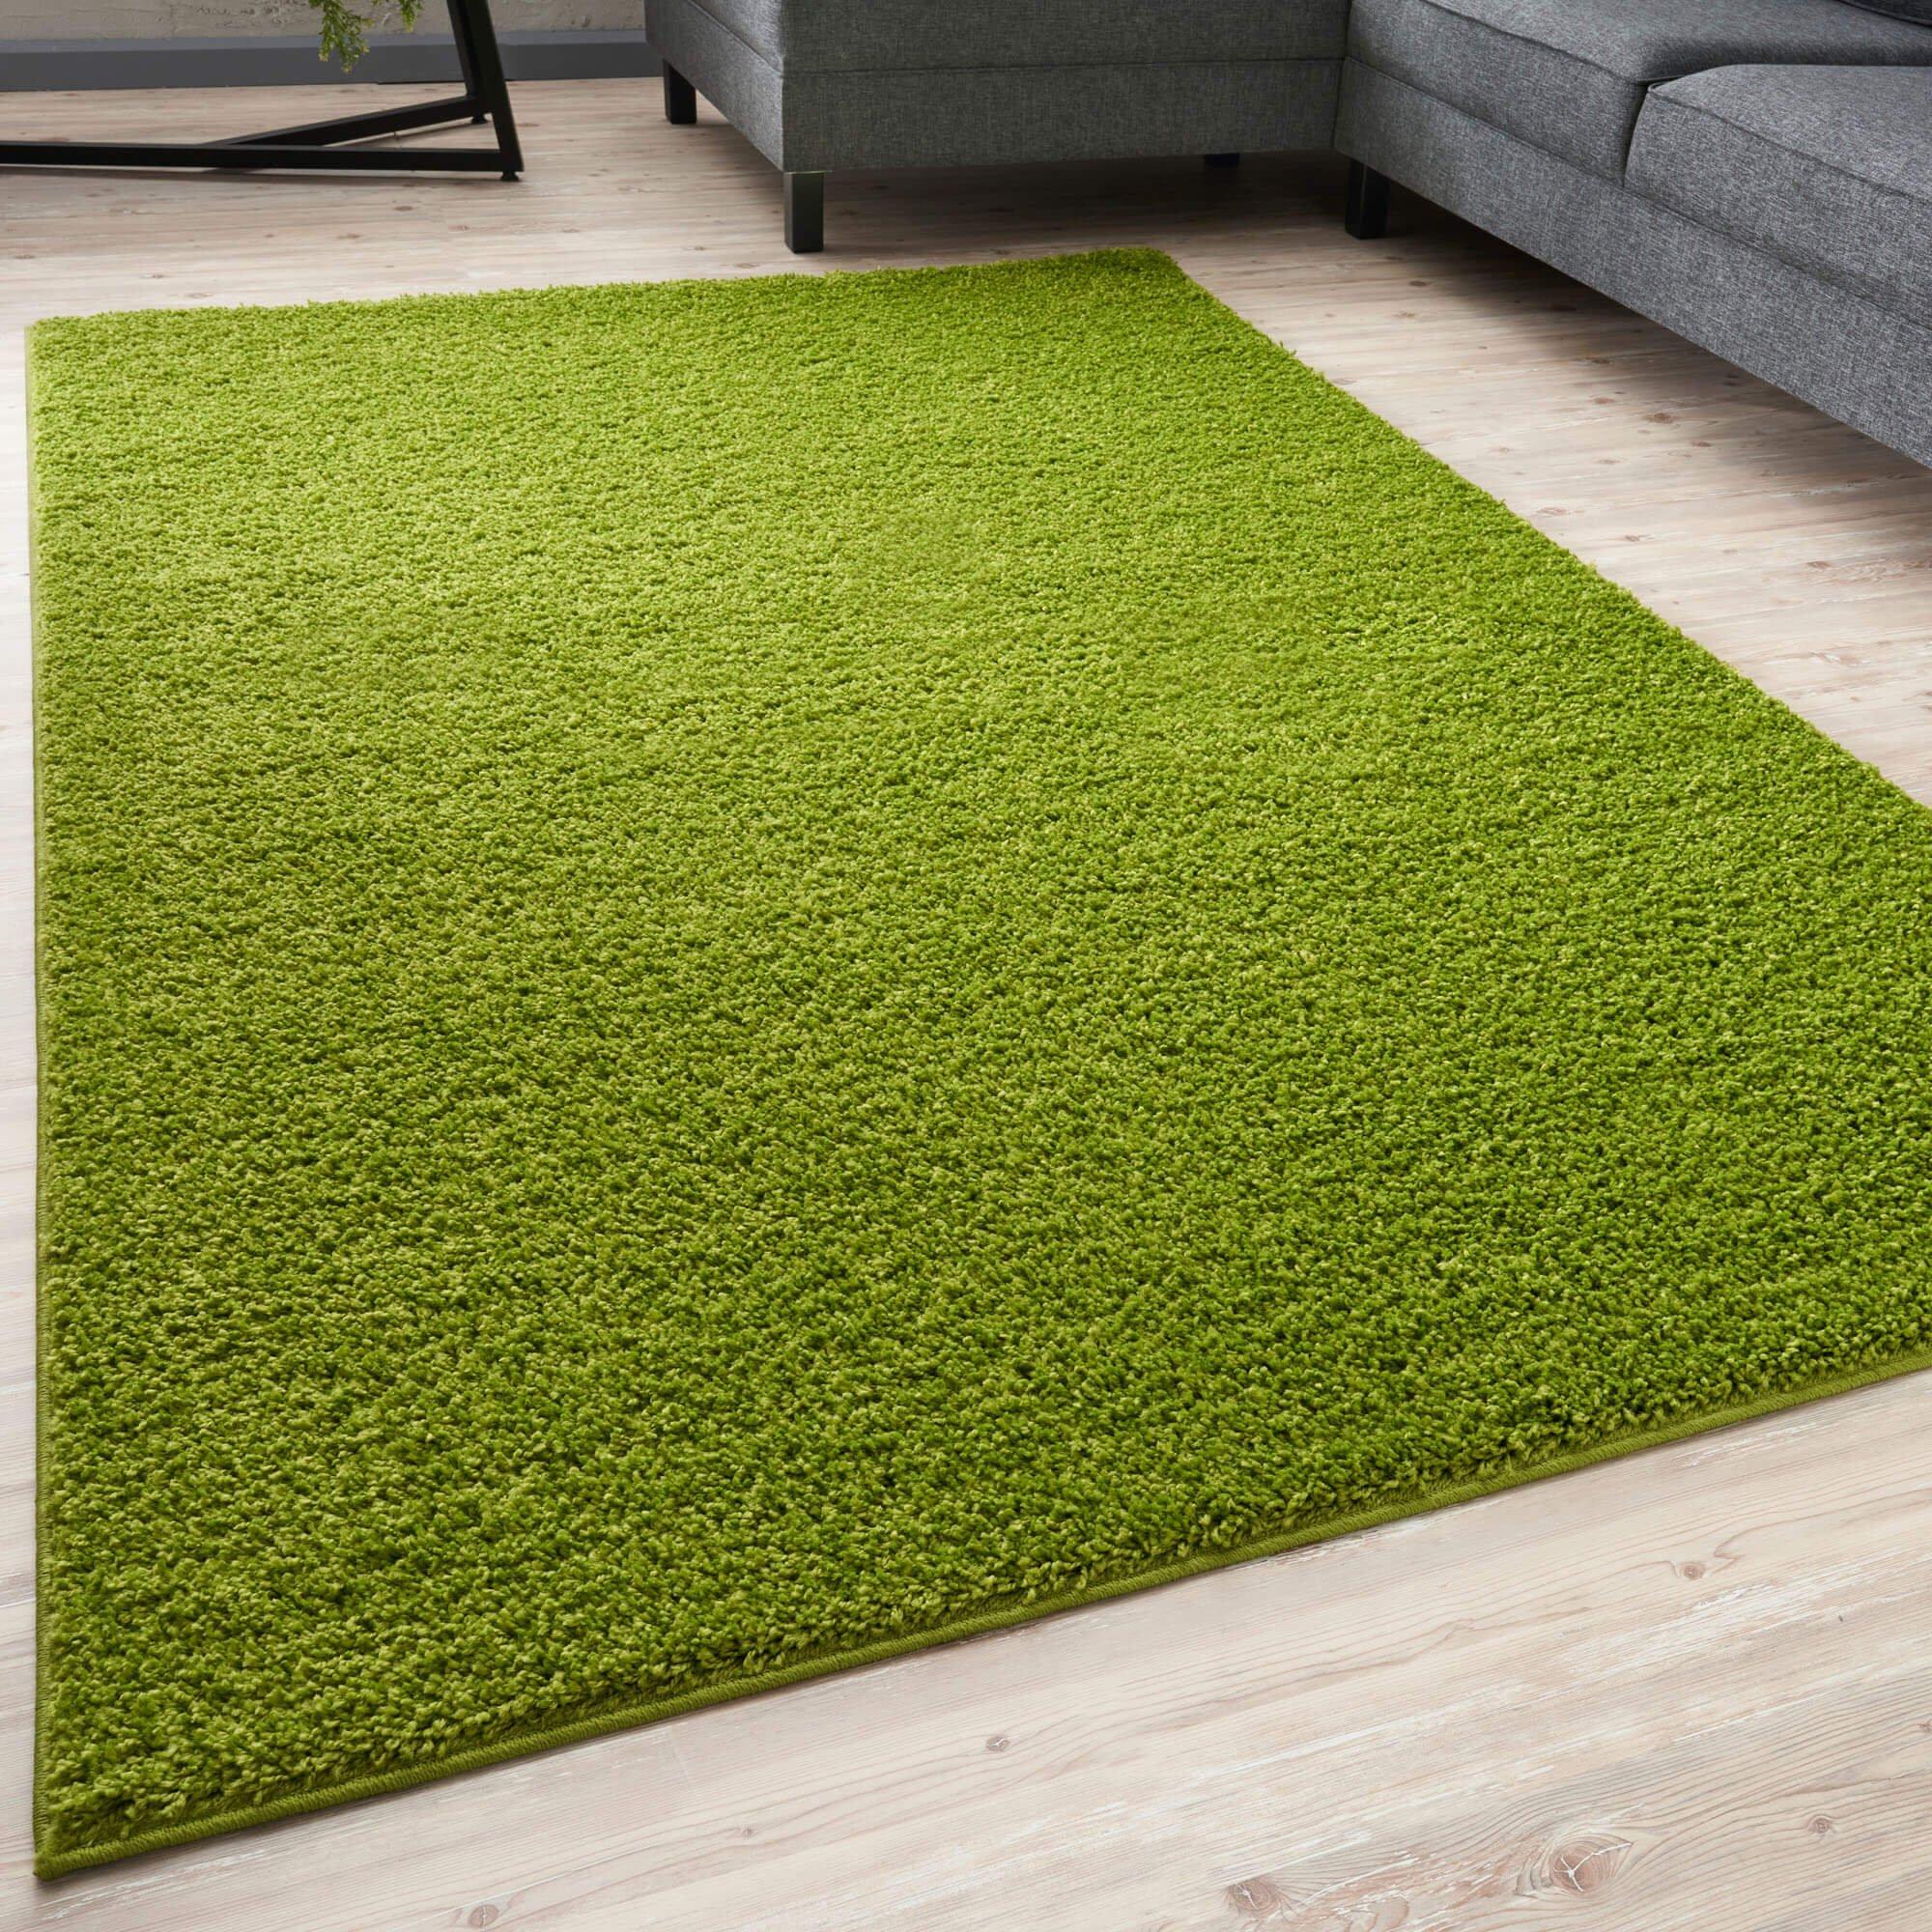 Myshaggy Collection Rugs Solid Design in Green